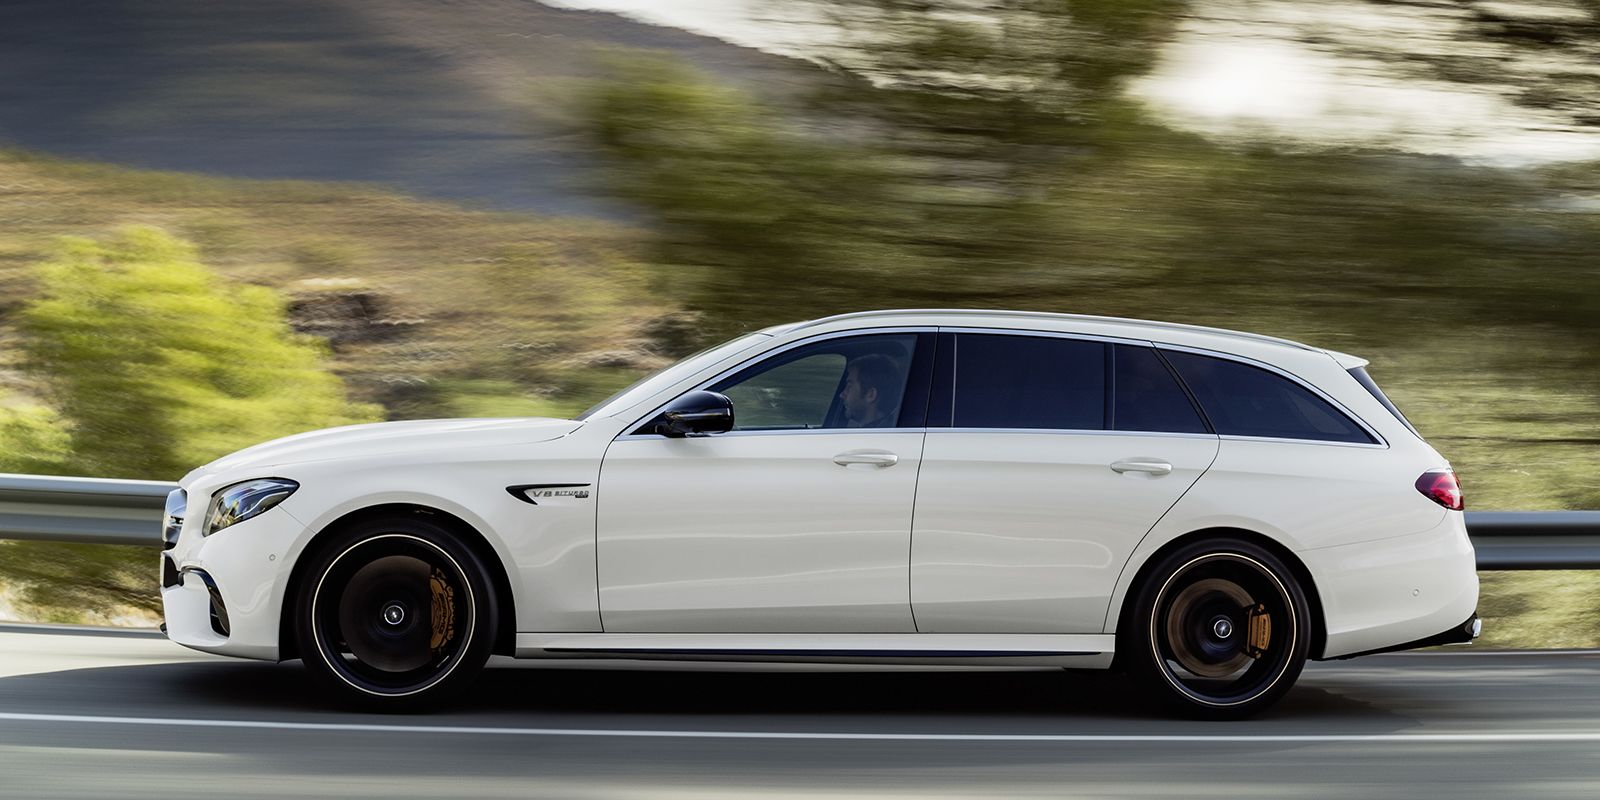 The 2018 Mercedes Amg E63 S Wagon Is The 603 Hp Family Hauler Dreams Are Made Of